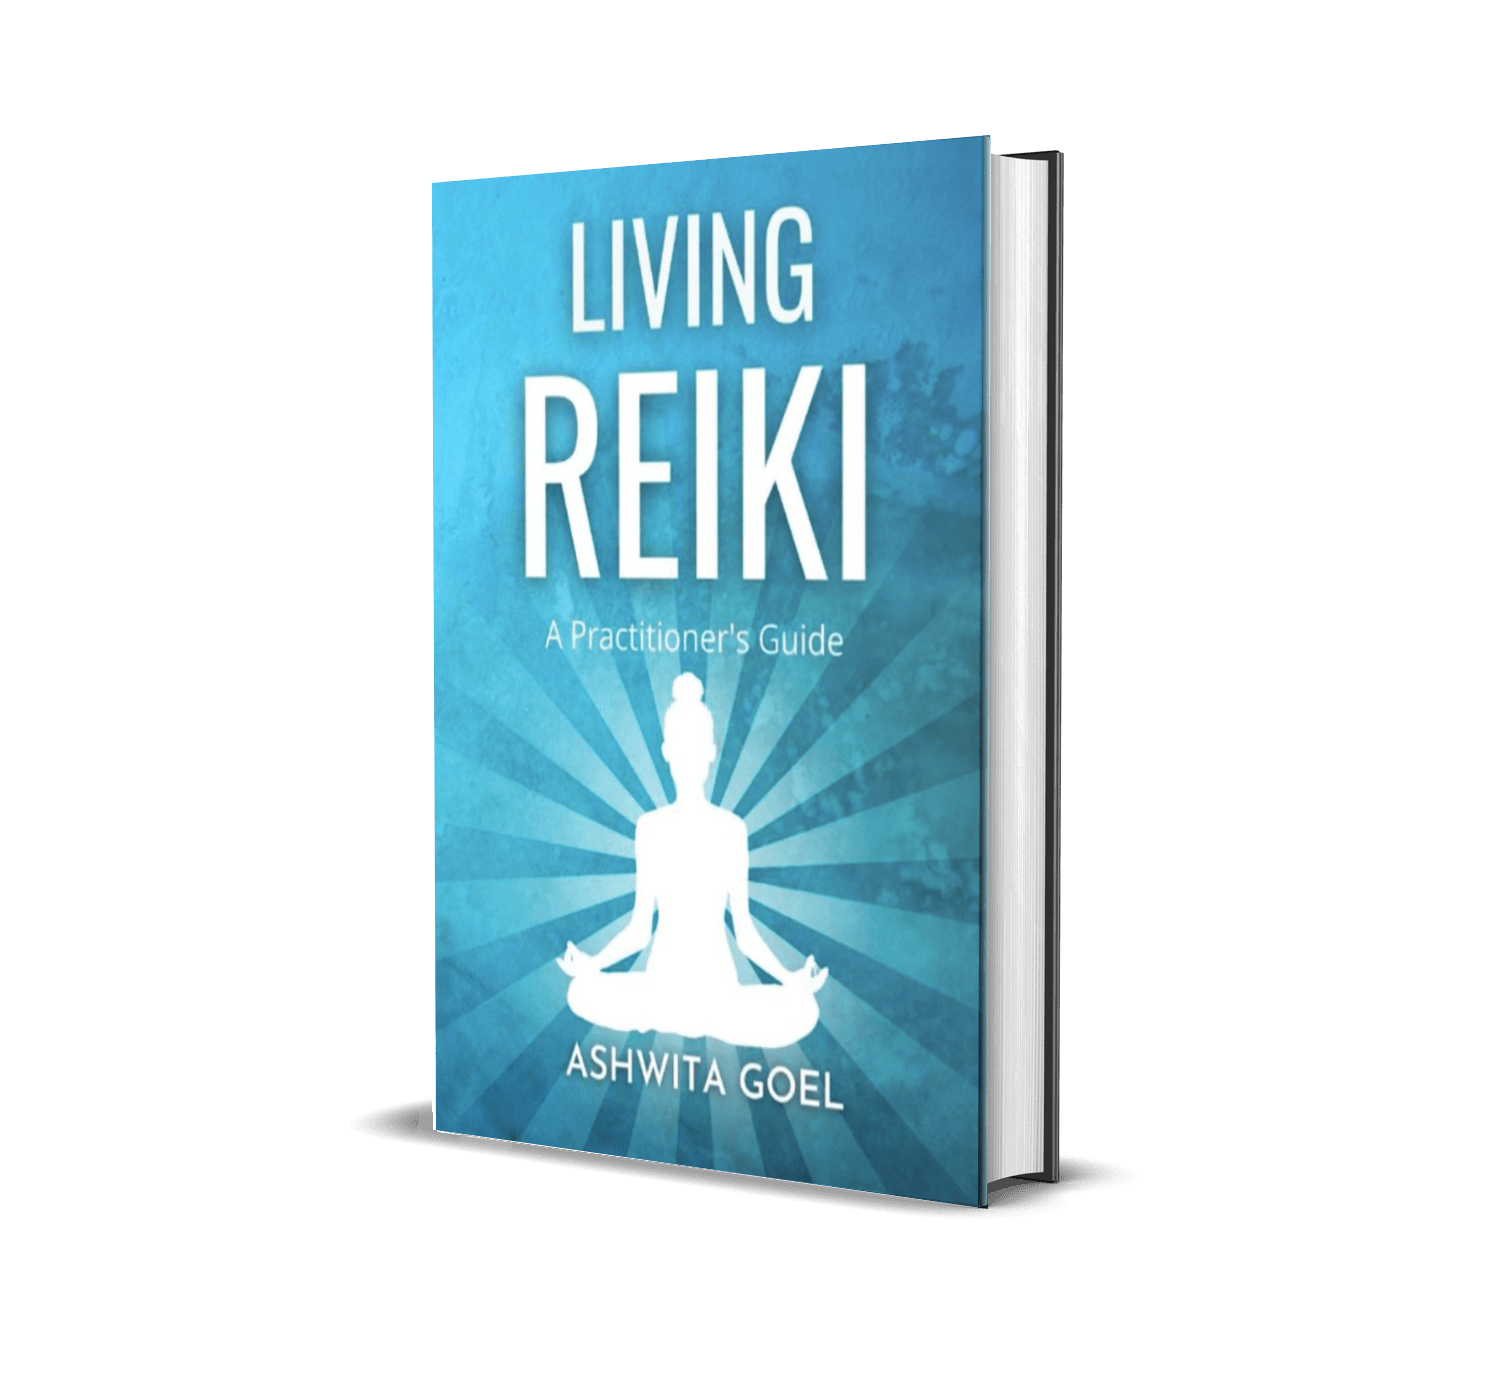 Living Reiki: A Practitioner's Guide